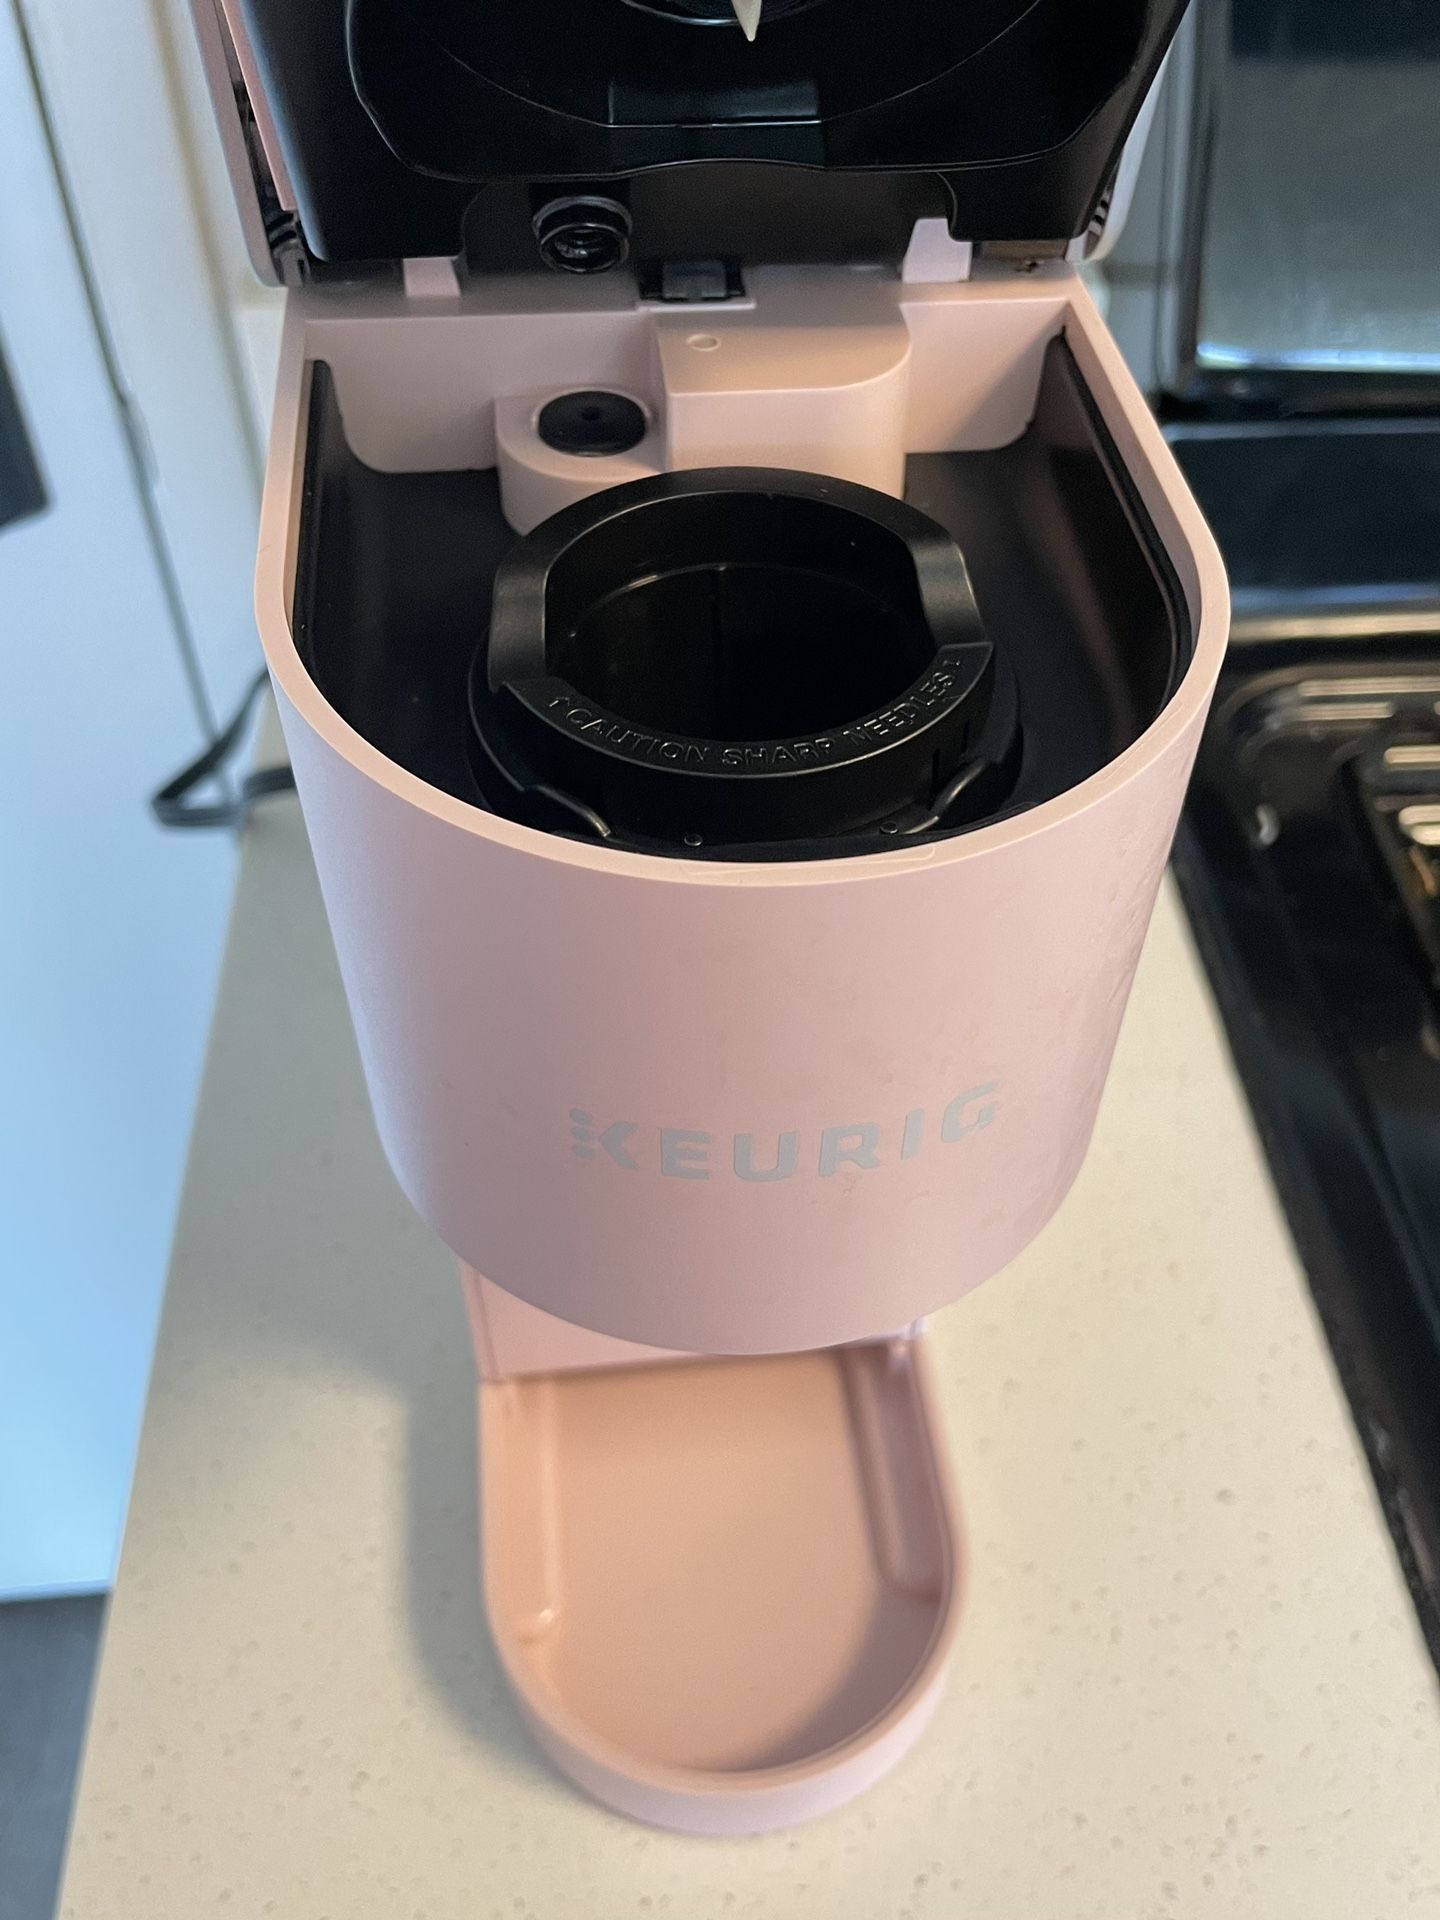 Brand New Mini Pink Keurig for Sale in Morris, IL - OfferUp